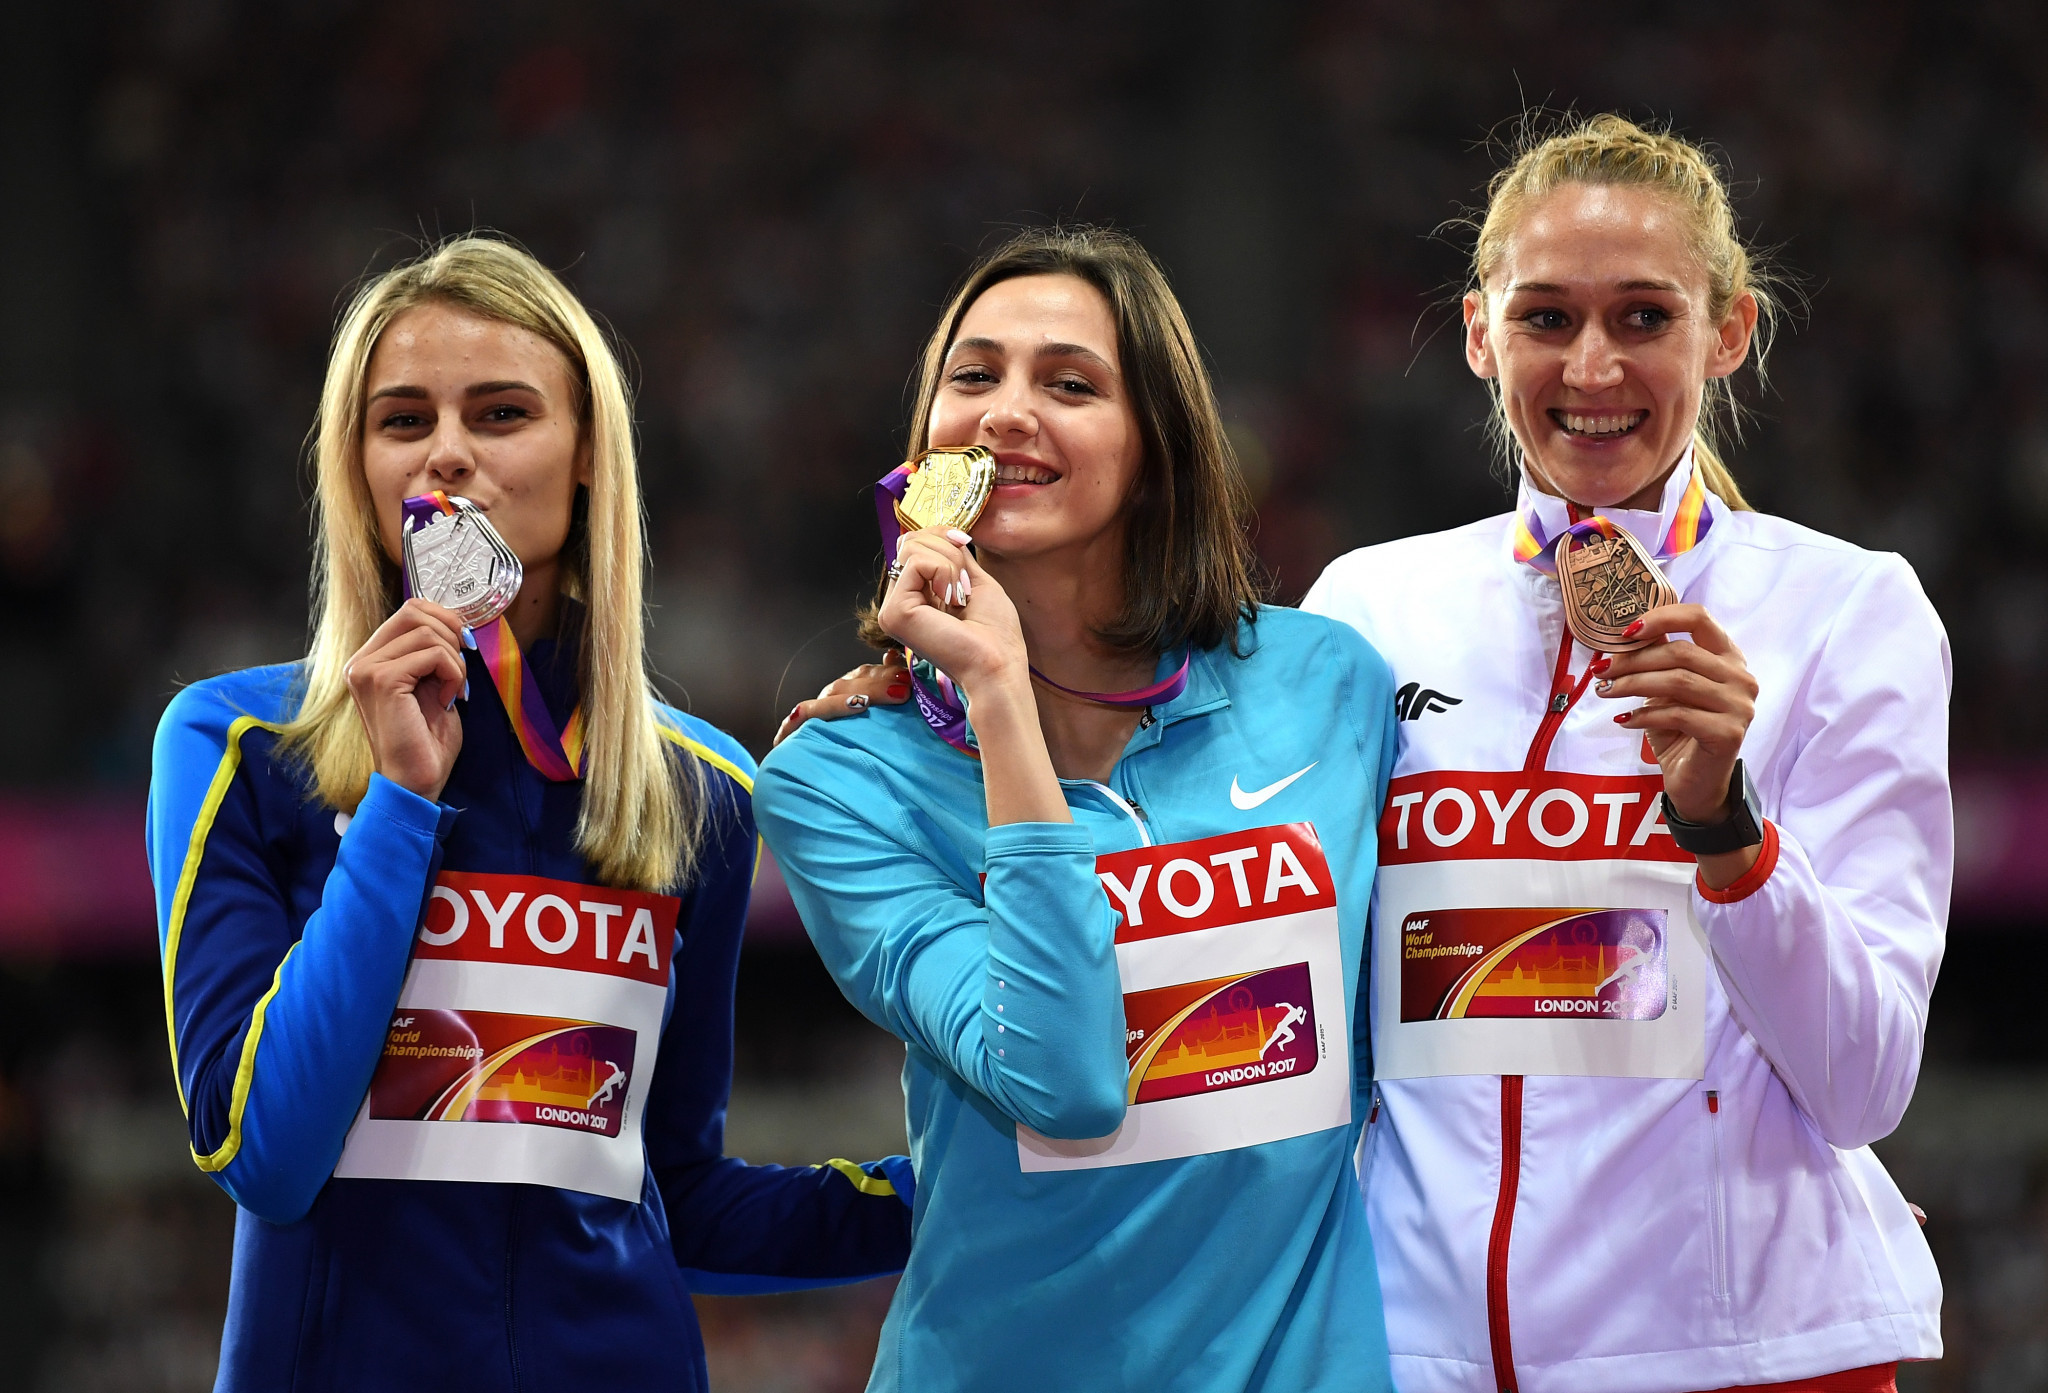 High jumper Maria Lasitskene, centre, was among the Russian athletes forced to compete as a neutral at the 2017 IAAF World Championships in London ©Getty Images